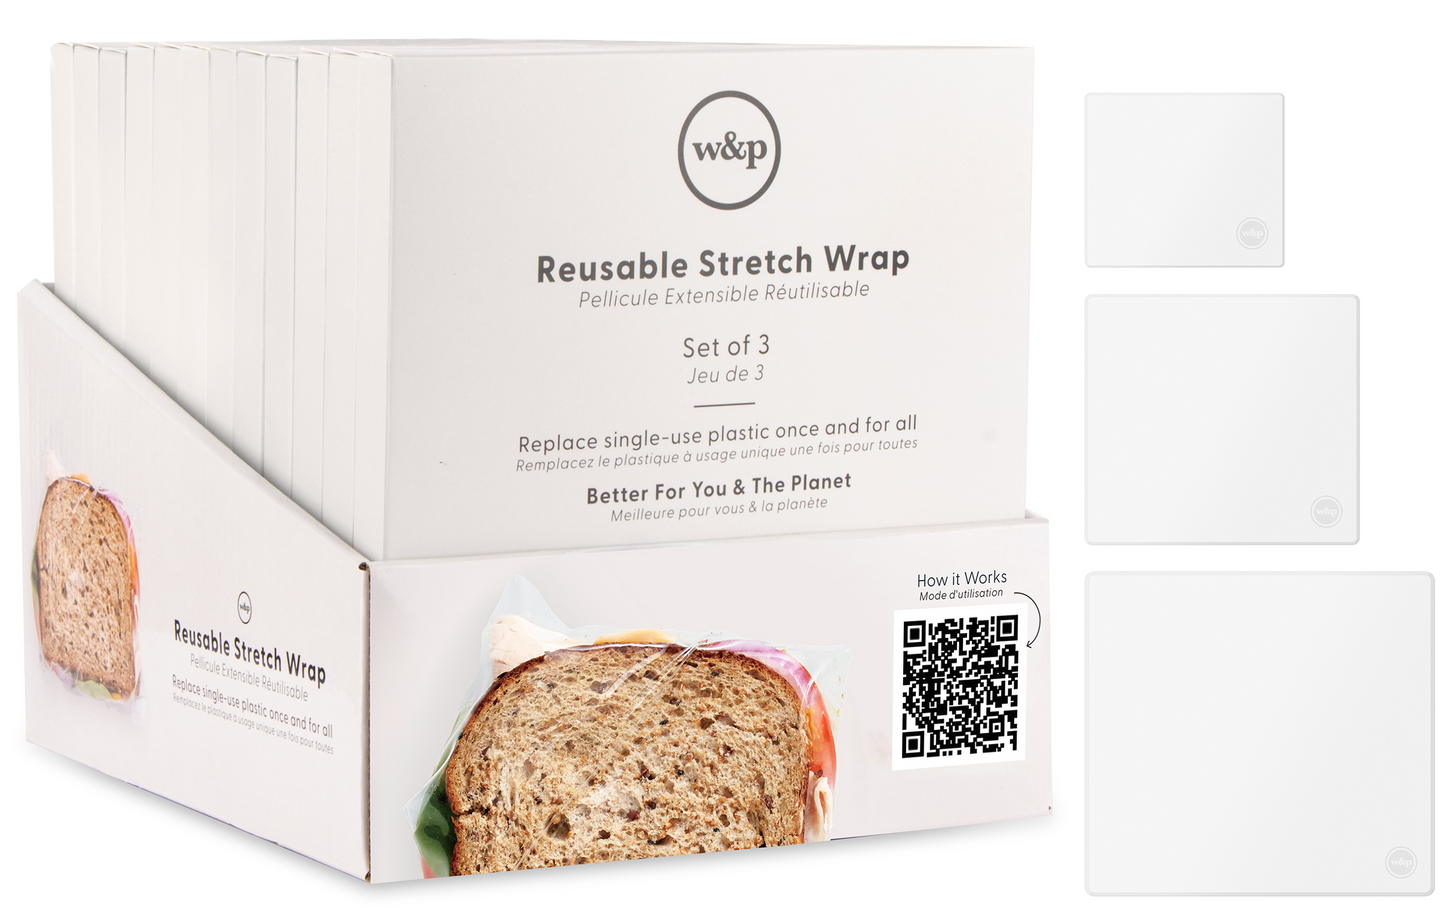 W&P - Reusable Silicone Stretch Wrap - Set of 3 - TRAY PACK